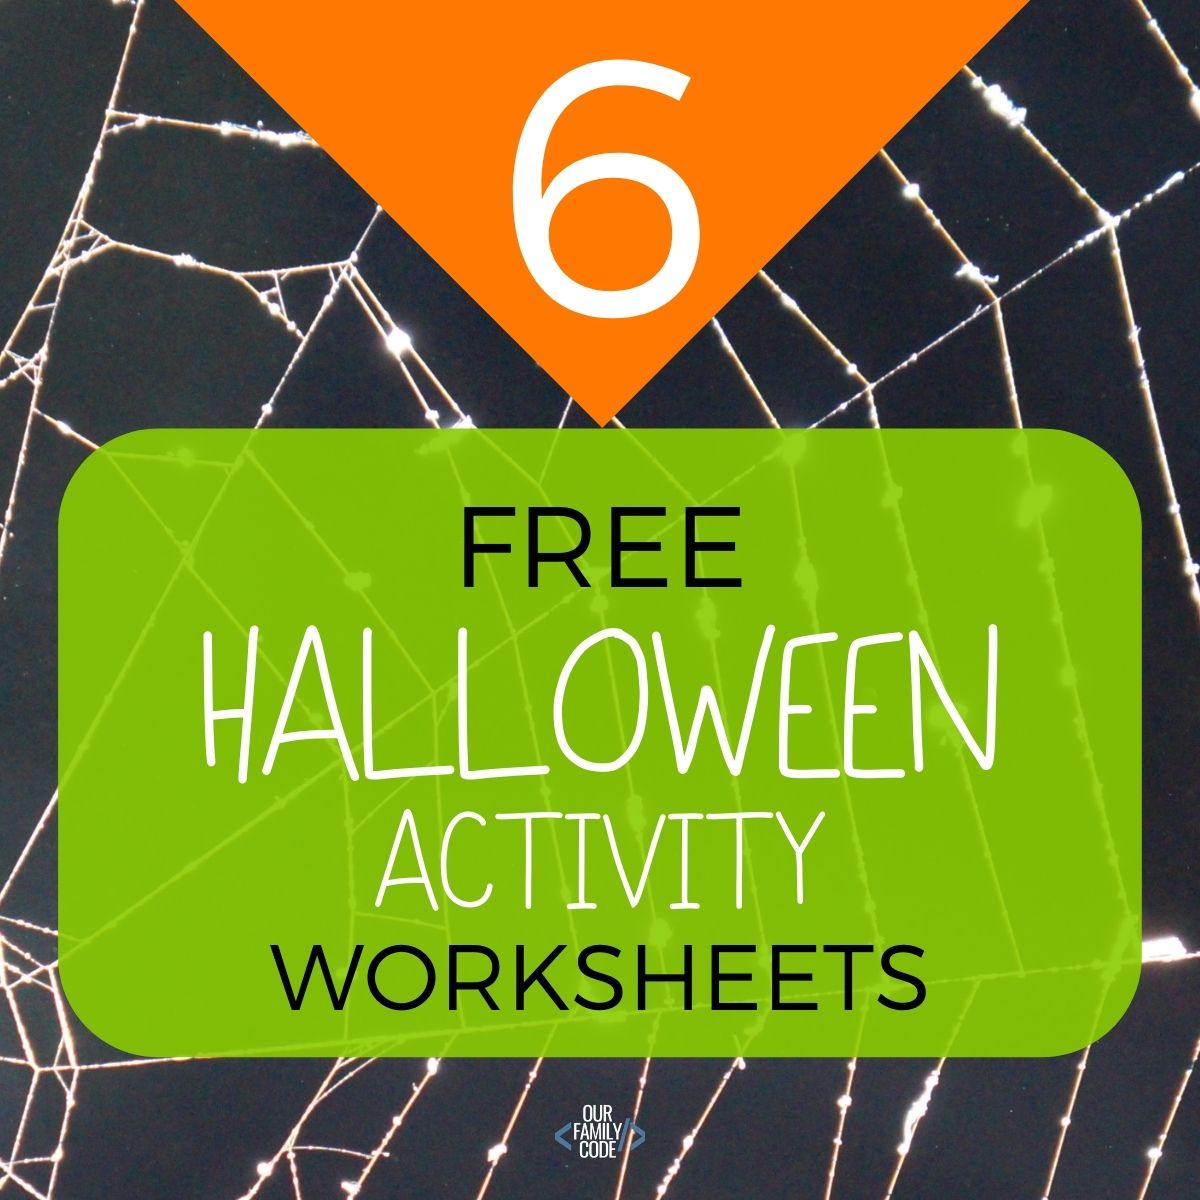 fi free halloween activity worksheets You’ll love these hands-on science STEAM activities!